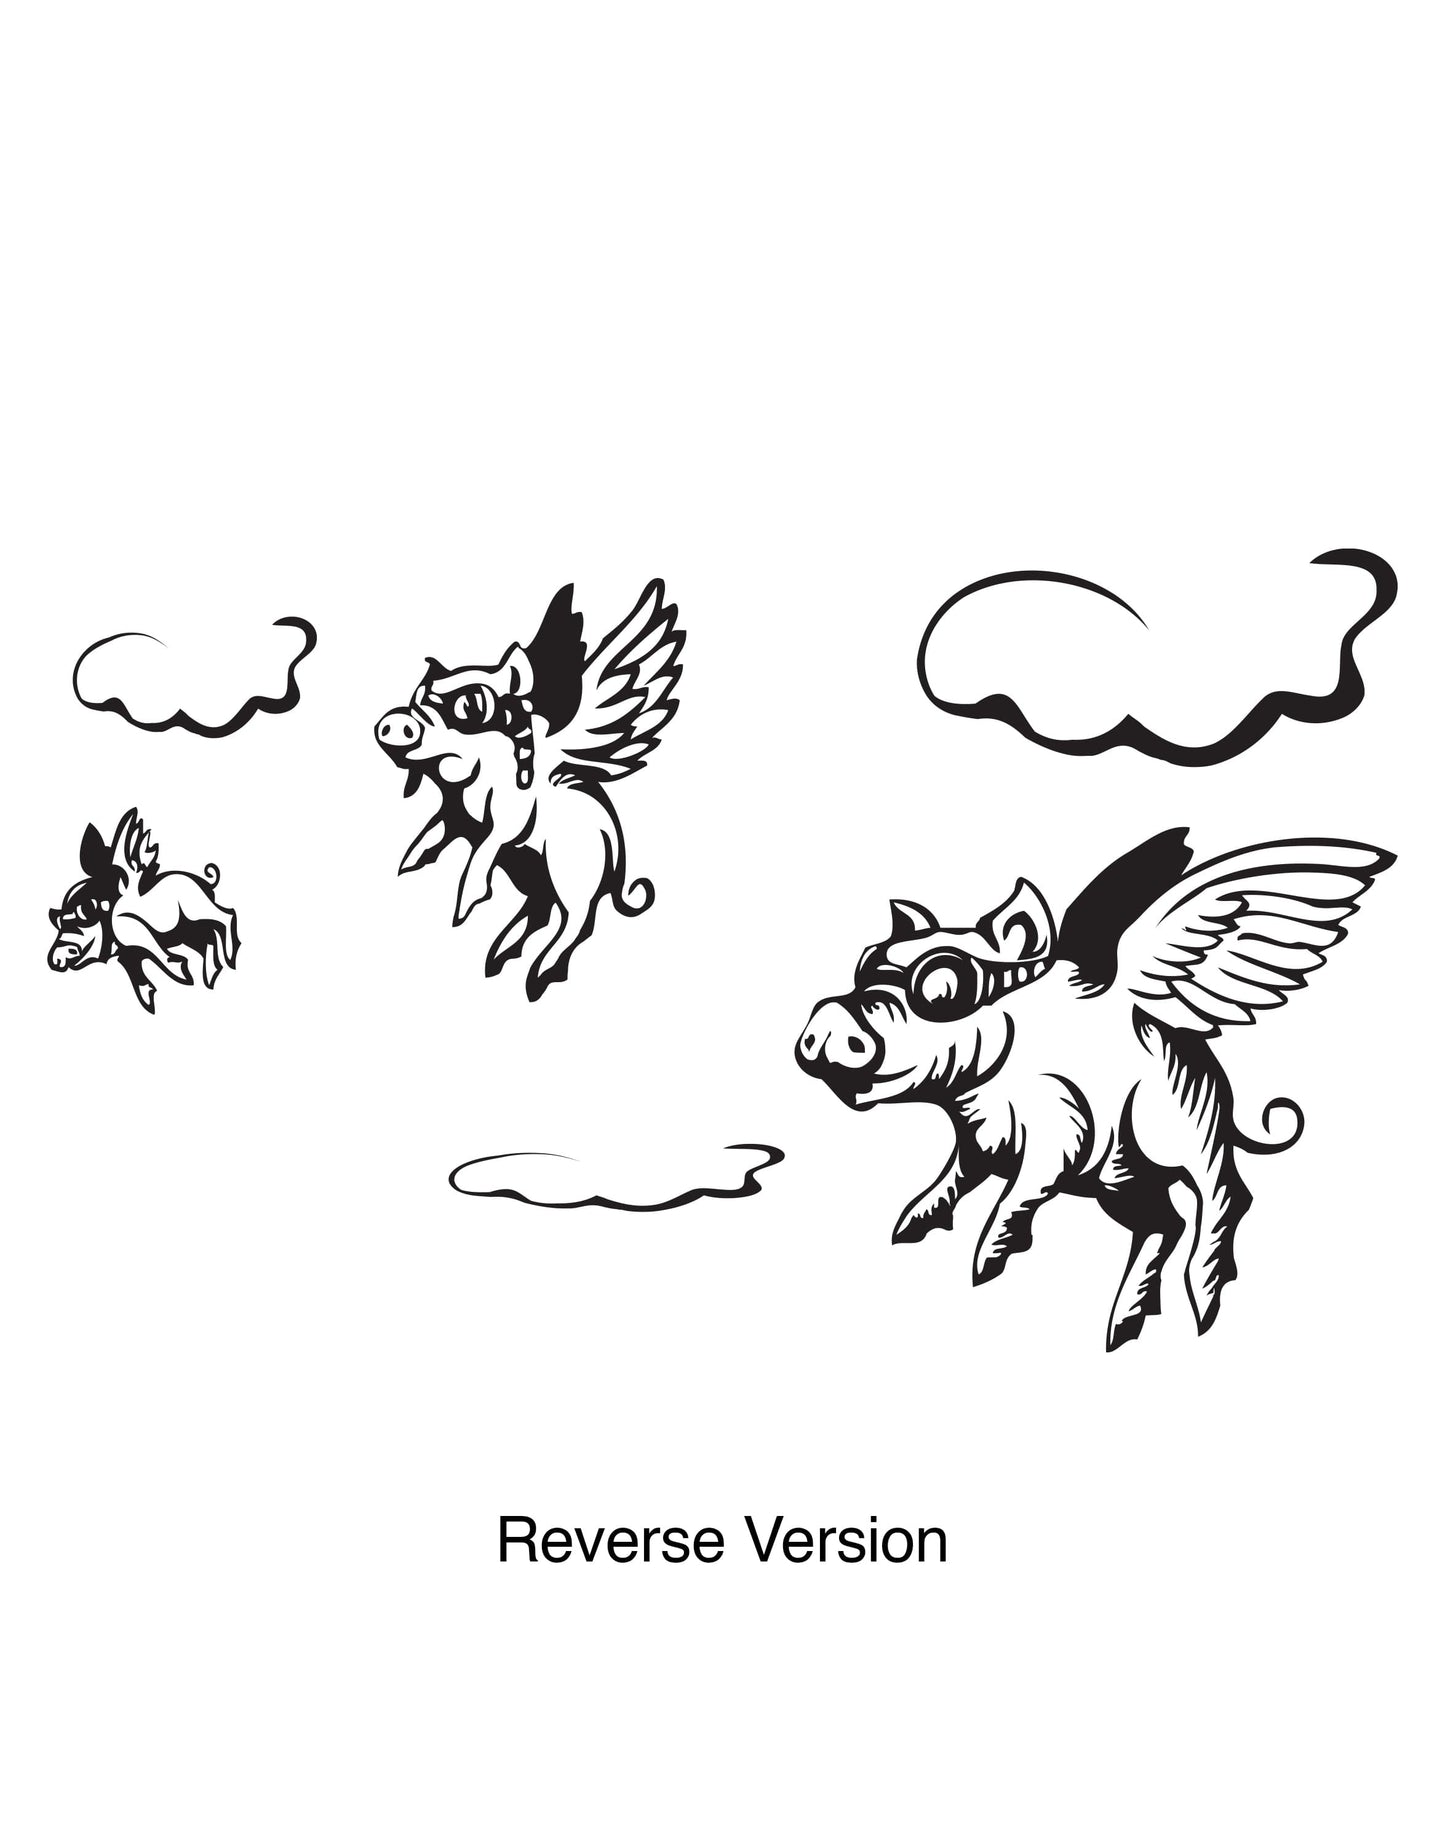 3 Little Pigs Flying Above Clouds Wall Decal.  #GFoster130